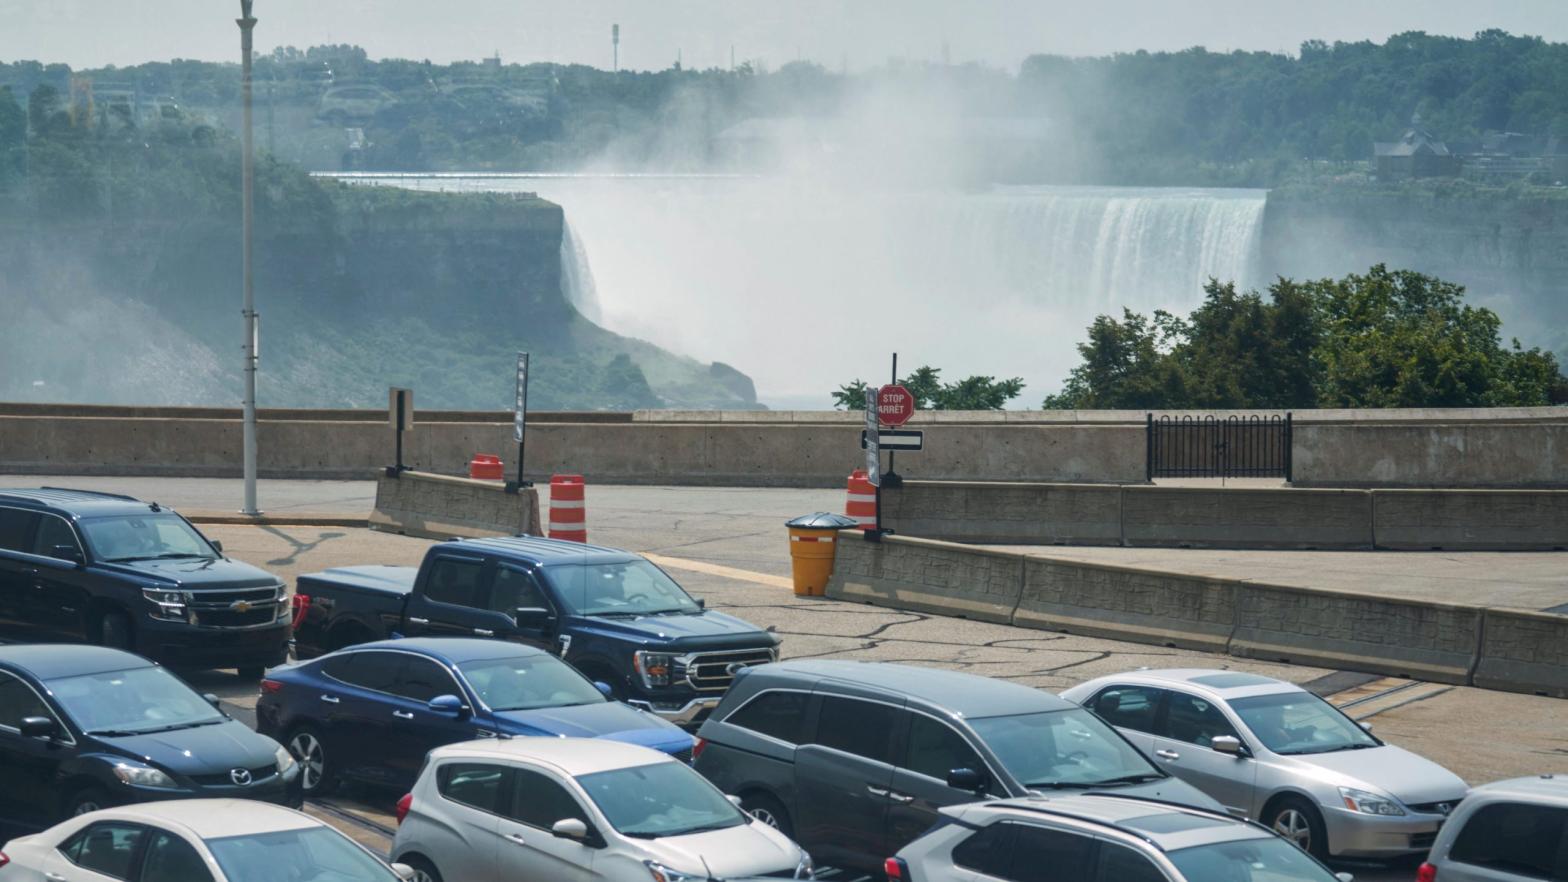 Travellers wait to cross into Canada at the Rainbow Bridge in Niagara Falls, Ontario, August 9, 2021 as Canada reopened for nonessential travel to fully vaccinated Americans.  (Photo: Geoff Robins/AFP, Getty Images)